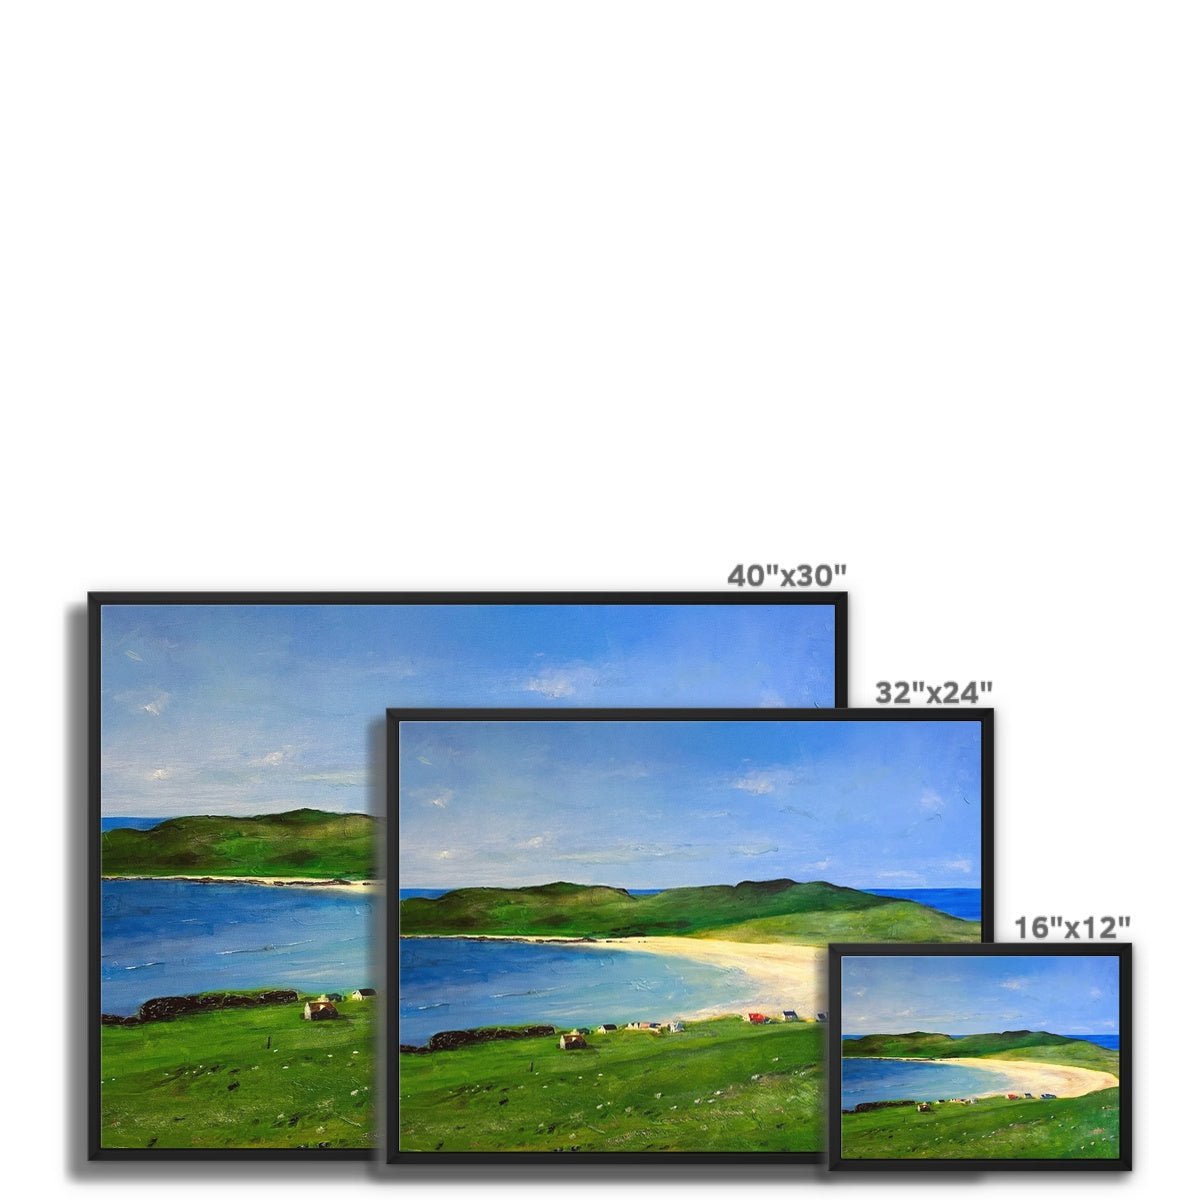 Balephuil Beach Tiree Painting | Framed Canvas From Scotland-Floating Framed Canvas Prints-Hebridean Islands Art Gallery-Paintings, Prints, Homeware, Art Gifts From Scotland By Scottish Artist Kevin Hunter